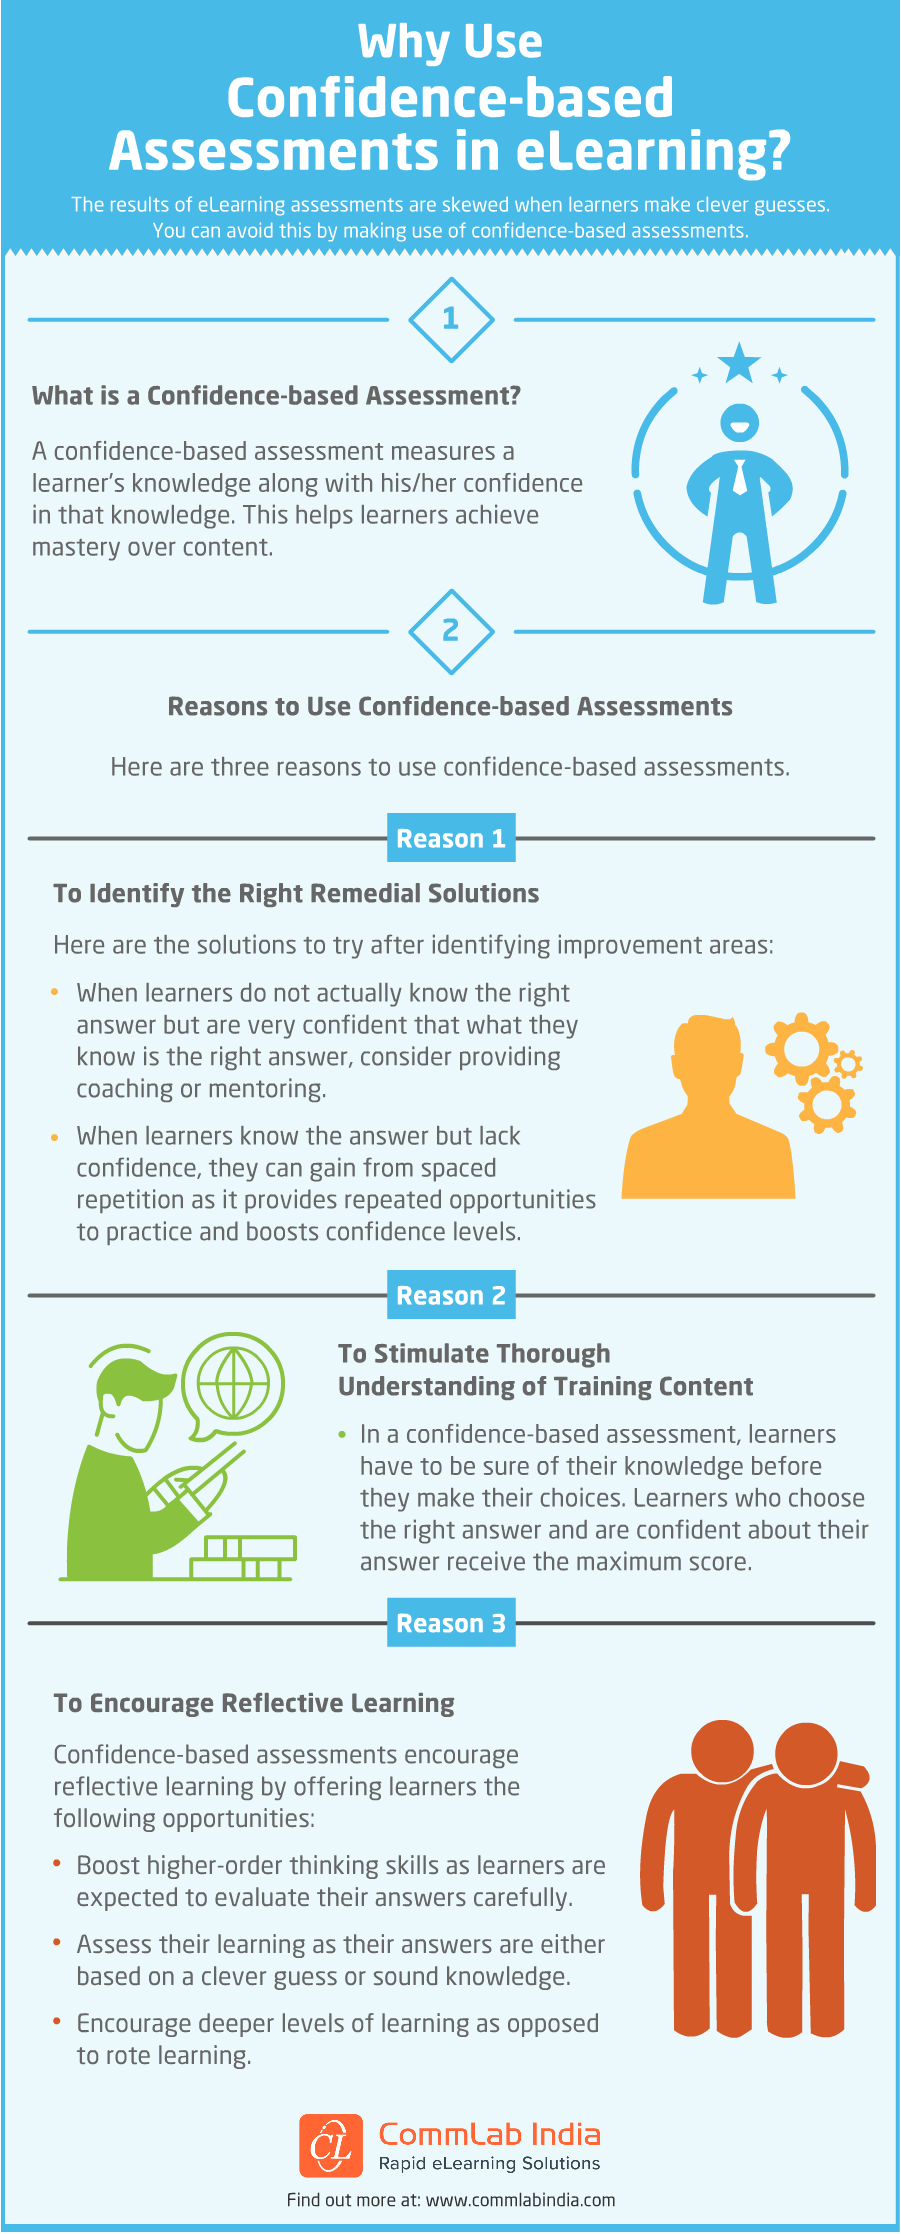 Why Use Confidence-based Assessments in eLearning [Infographic]